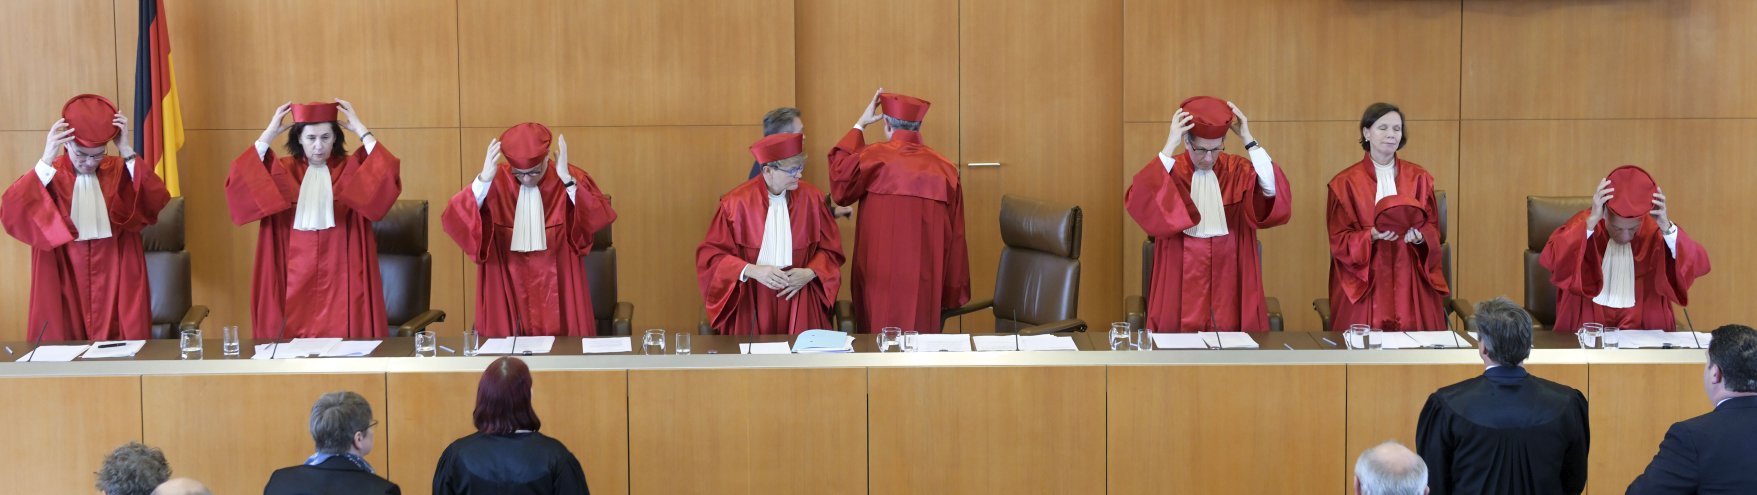 The First Senate of the German Federal Constitutional Court (Bundesverfassungsgericht) judges a case in Karlsruhe, southwestern Germany, on 5 November 2019. The BVerfG is considered to be the guardian of Germany’s Basic Law.